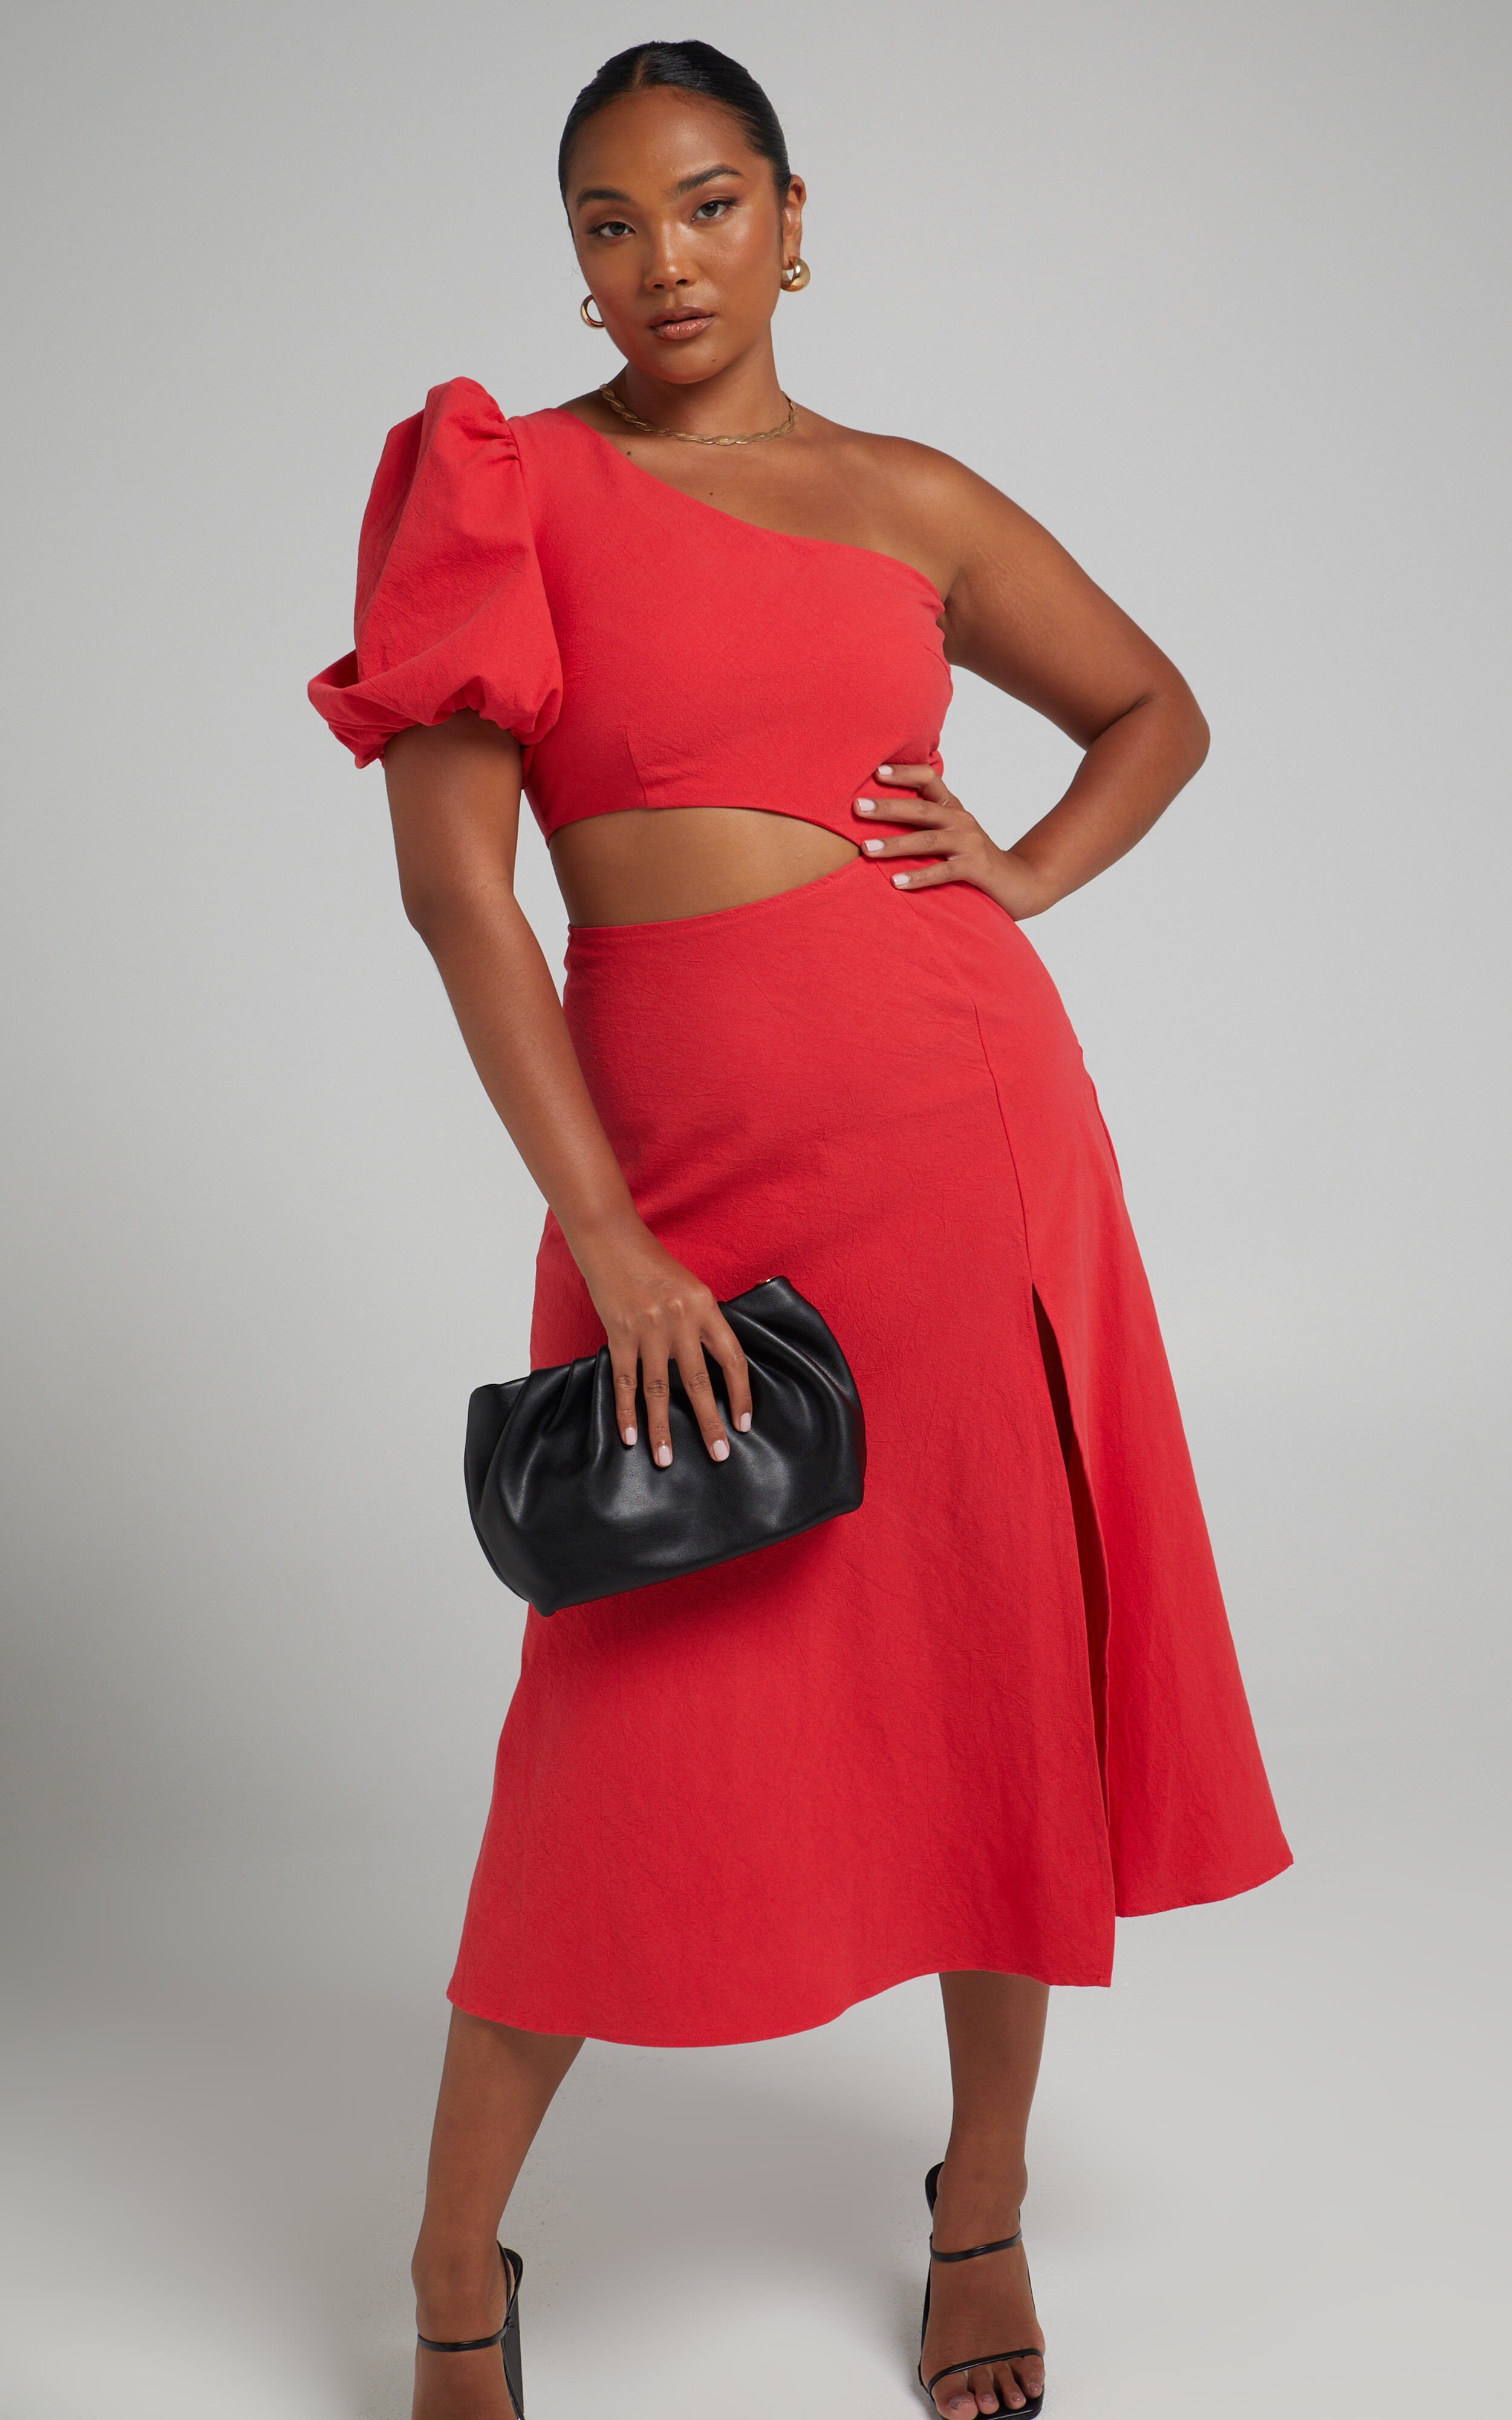 Marcia One Shoulder Midi Dress with Side Cut Out in Red - 04, RED4, super-hi-res image number null